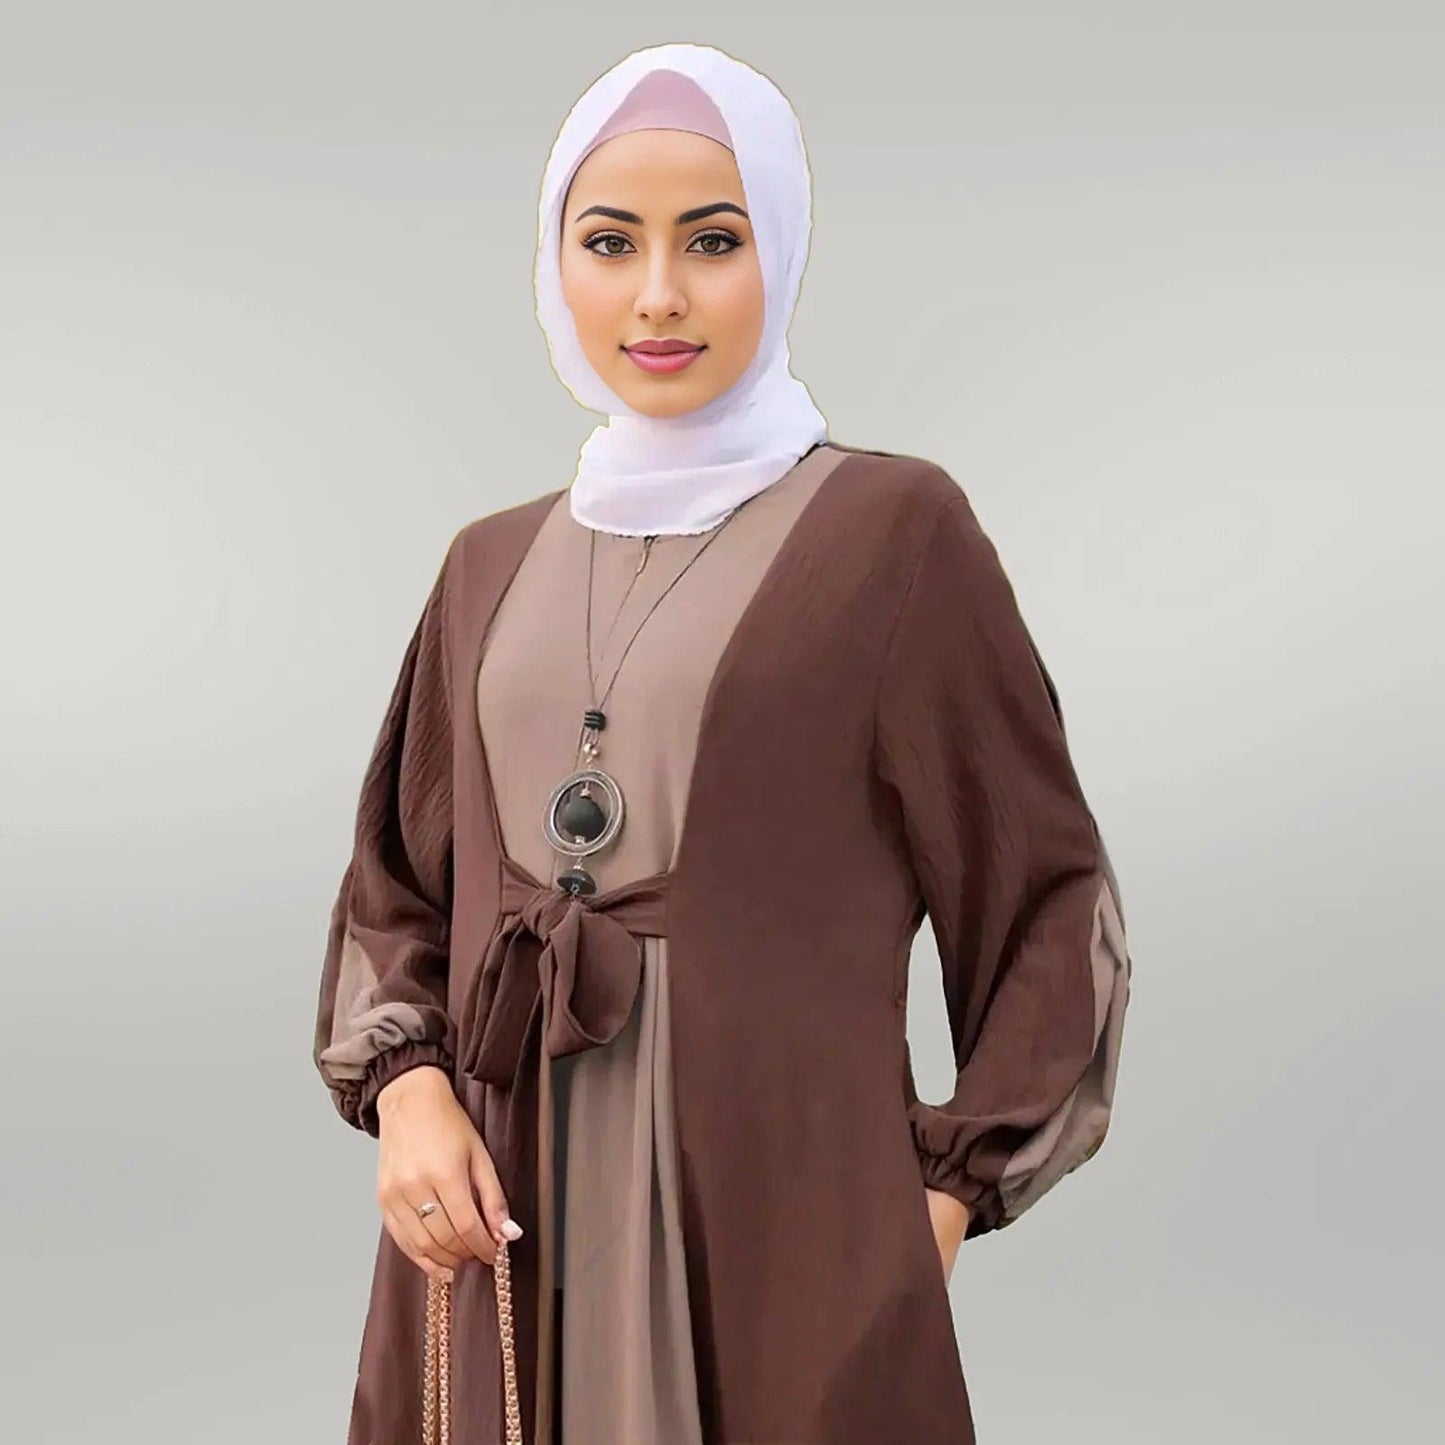 2 Toned Color Abaya in Green, Brown, Purple